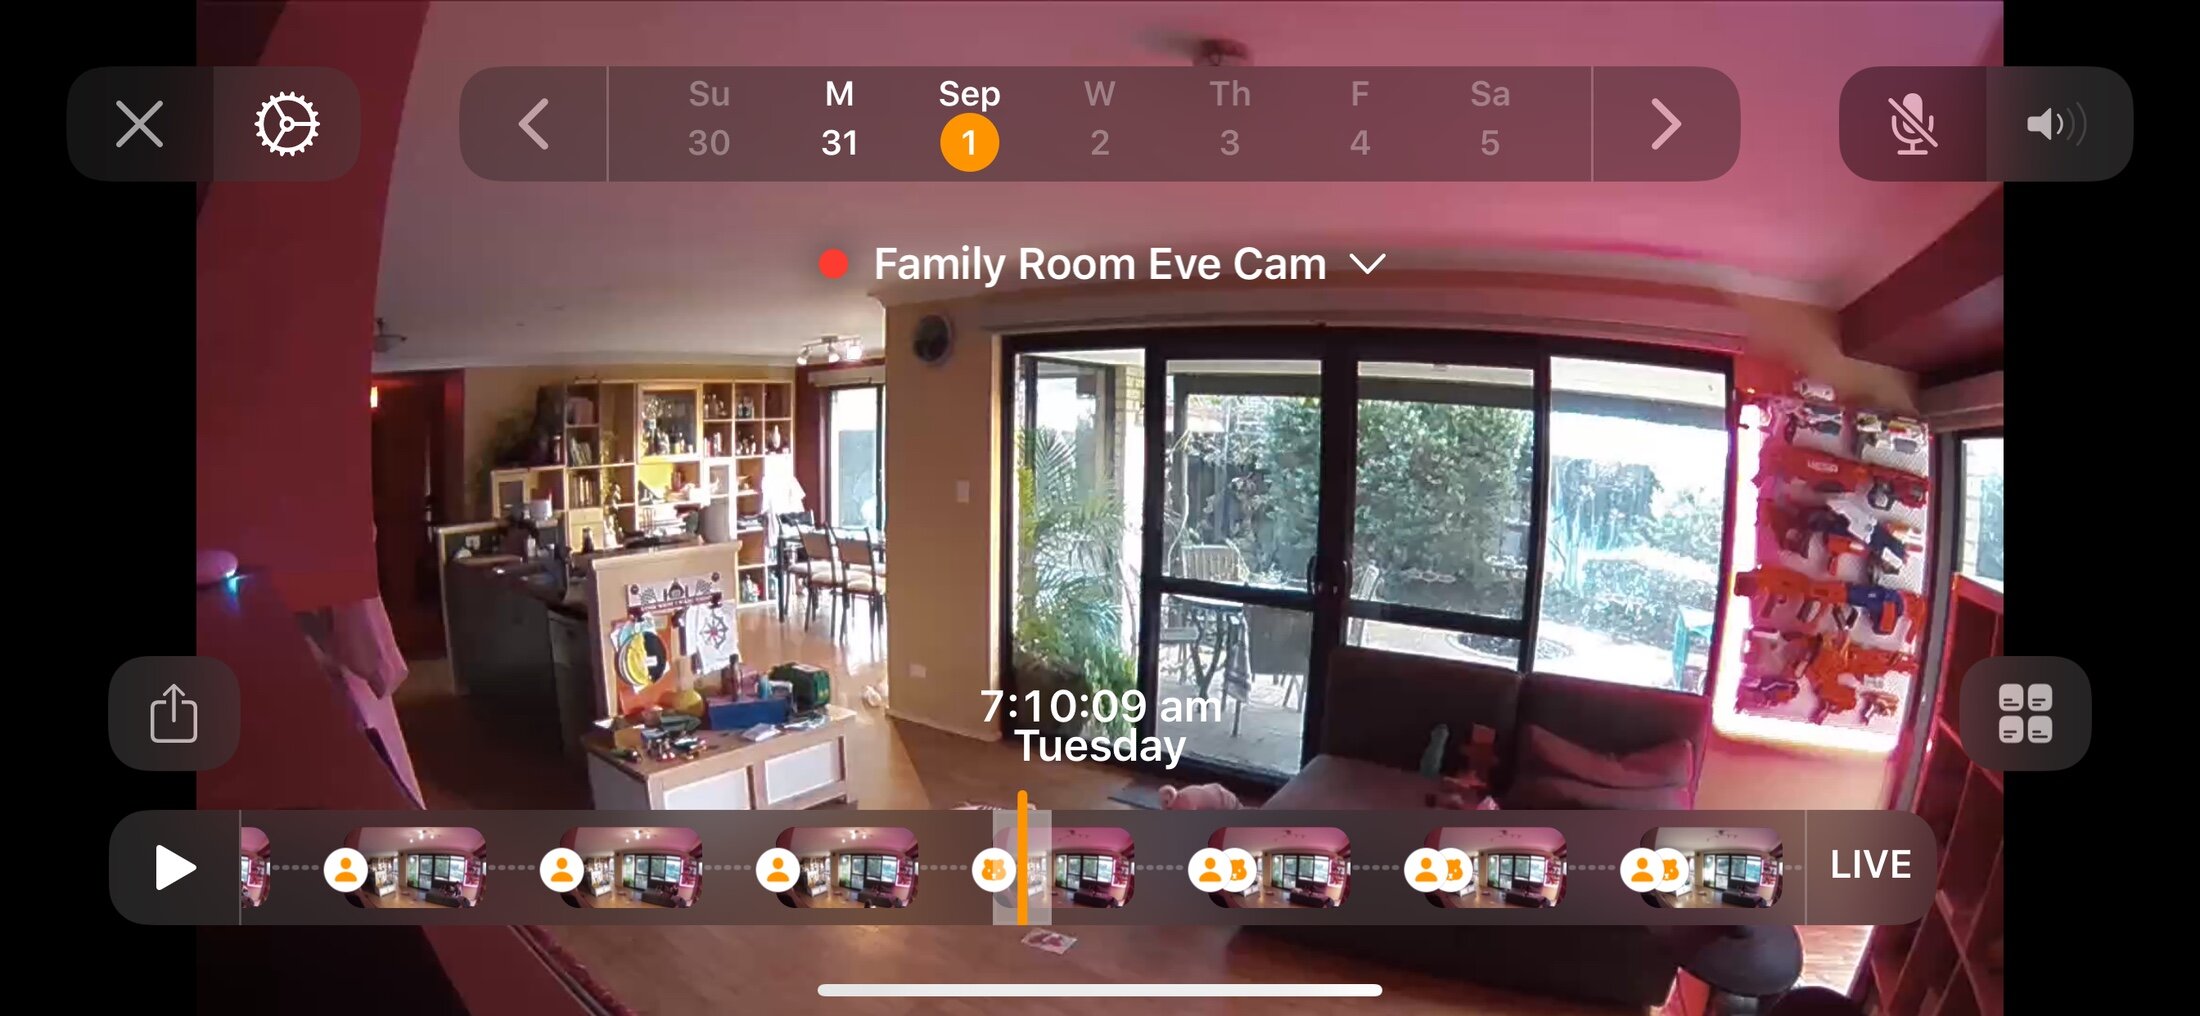 A screenshot showing the viewing of a camera and the Home app user interface